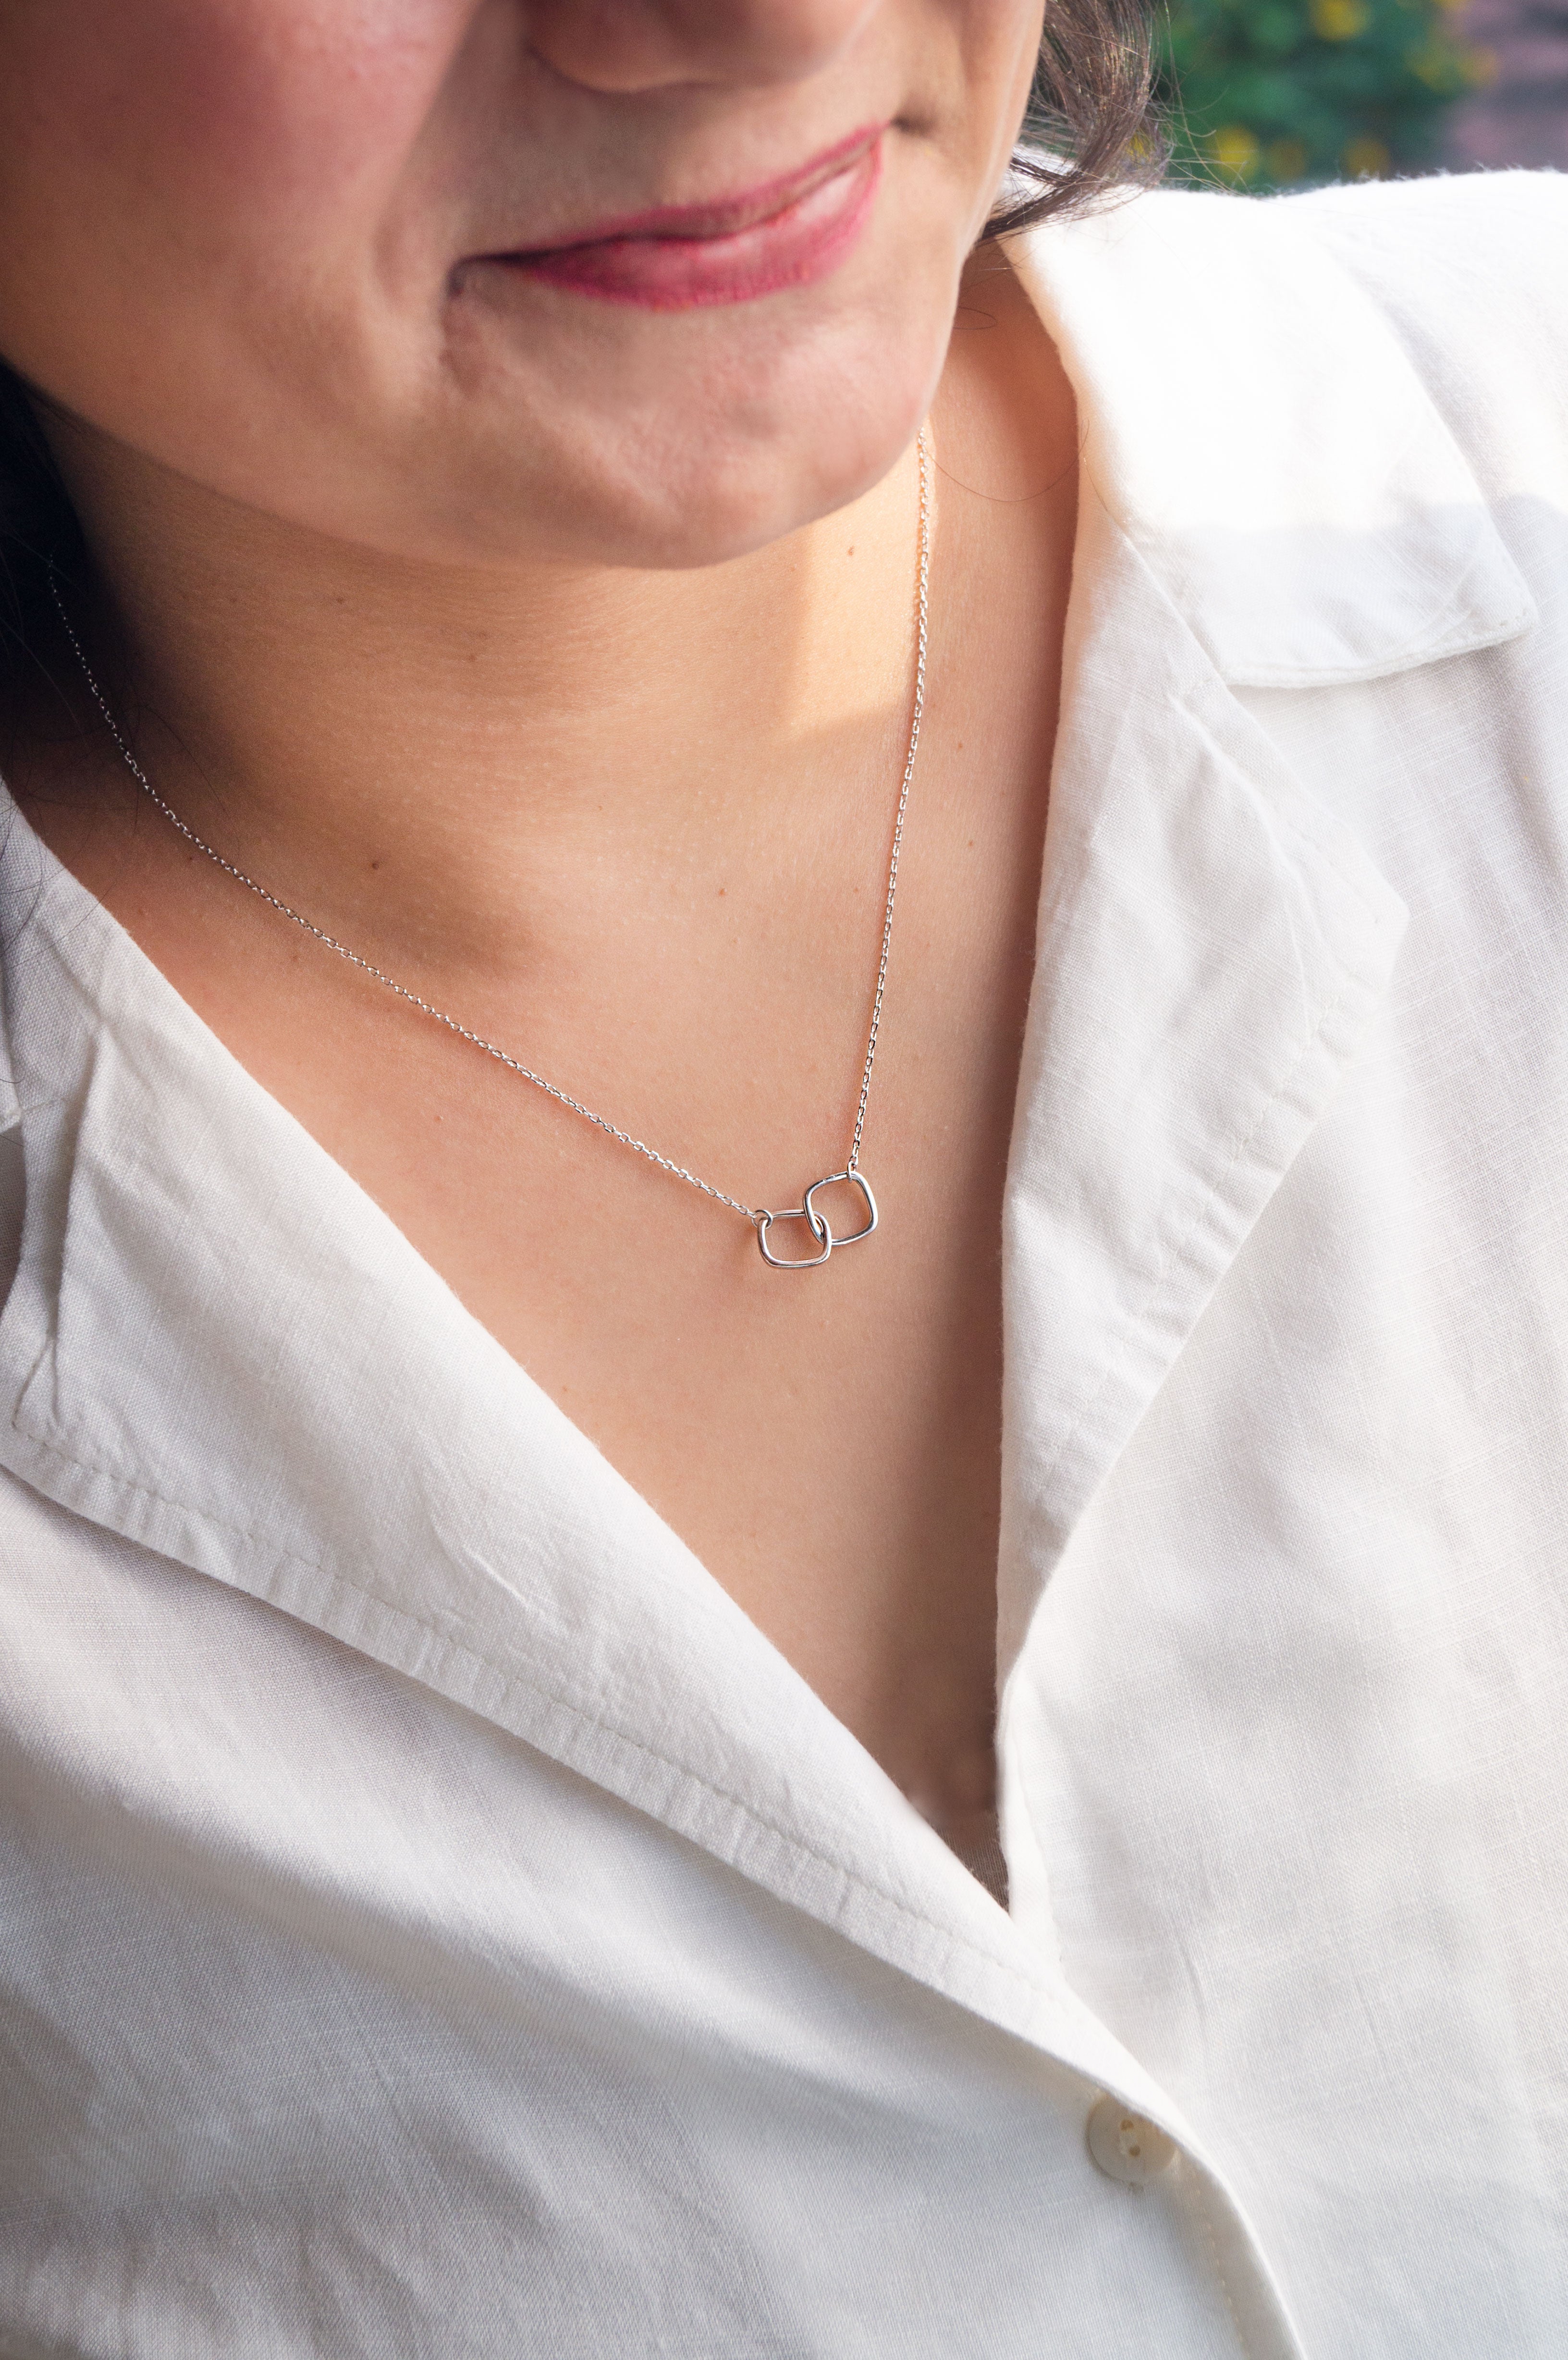 Interlocking Rings Necklace, Linked Circle Necklace, S925 Sterling Silver,  Gold, Rose Gold, Infinity Necklace, Double Circle Necklace Necklace